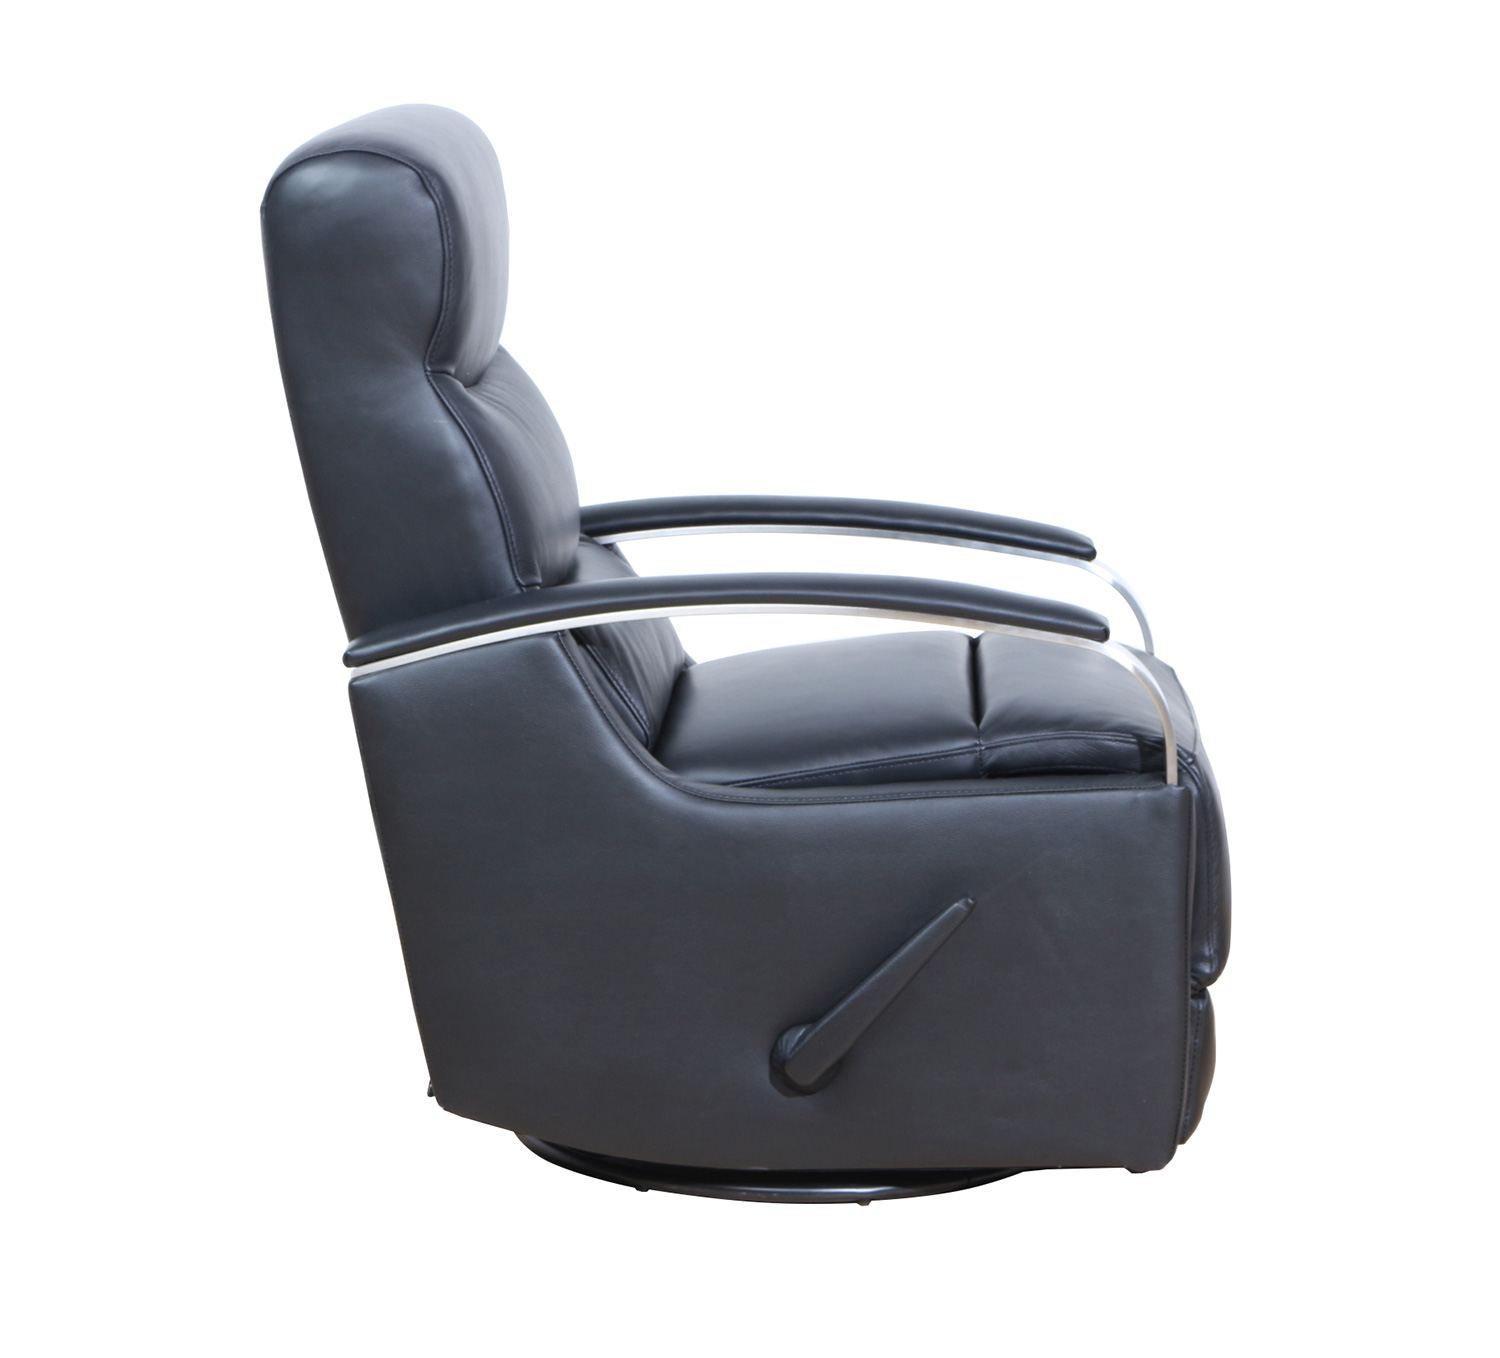 Barcalounger Shadow Swivel Glider Recliner Chair - Apollo Onyx/Leather Match